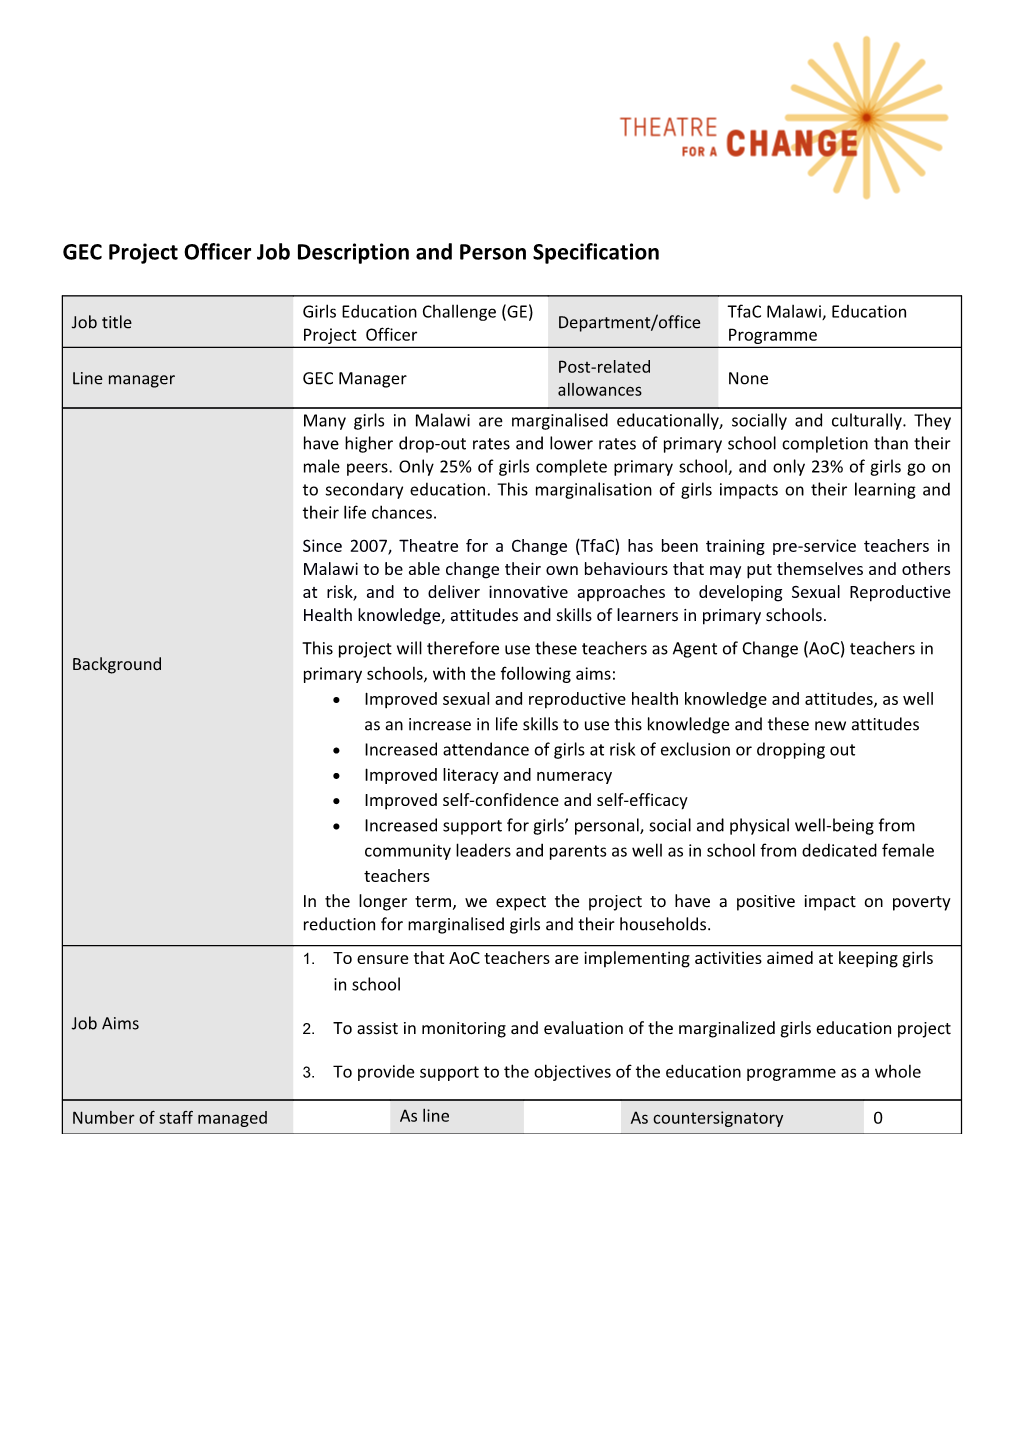 GEC Project Officer Job Description and Person Specification